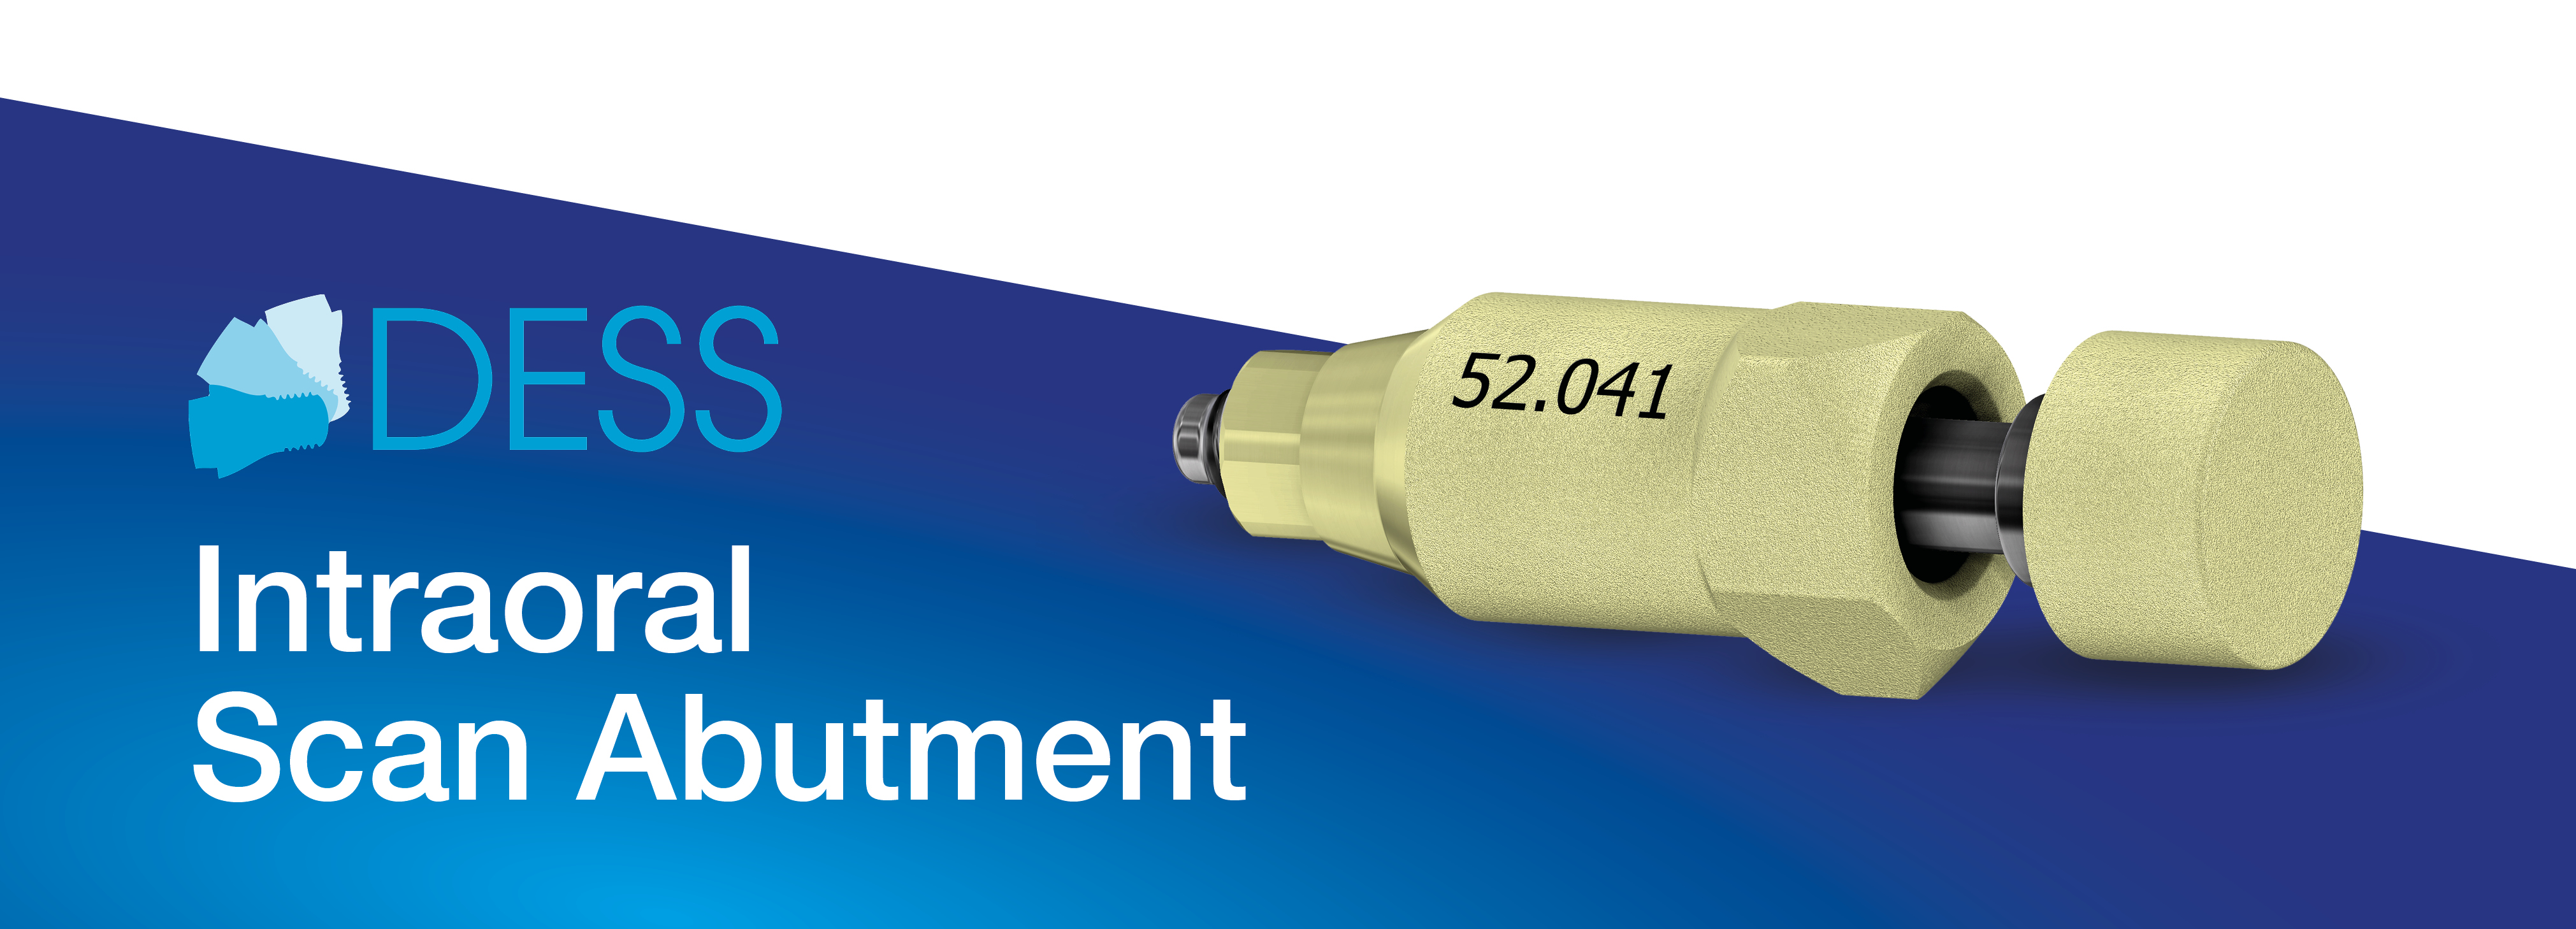 DESS Product presentation: DESS® Intraoral Scan Abutment